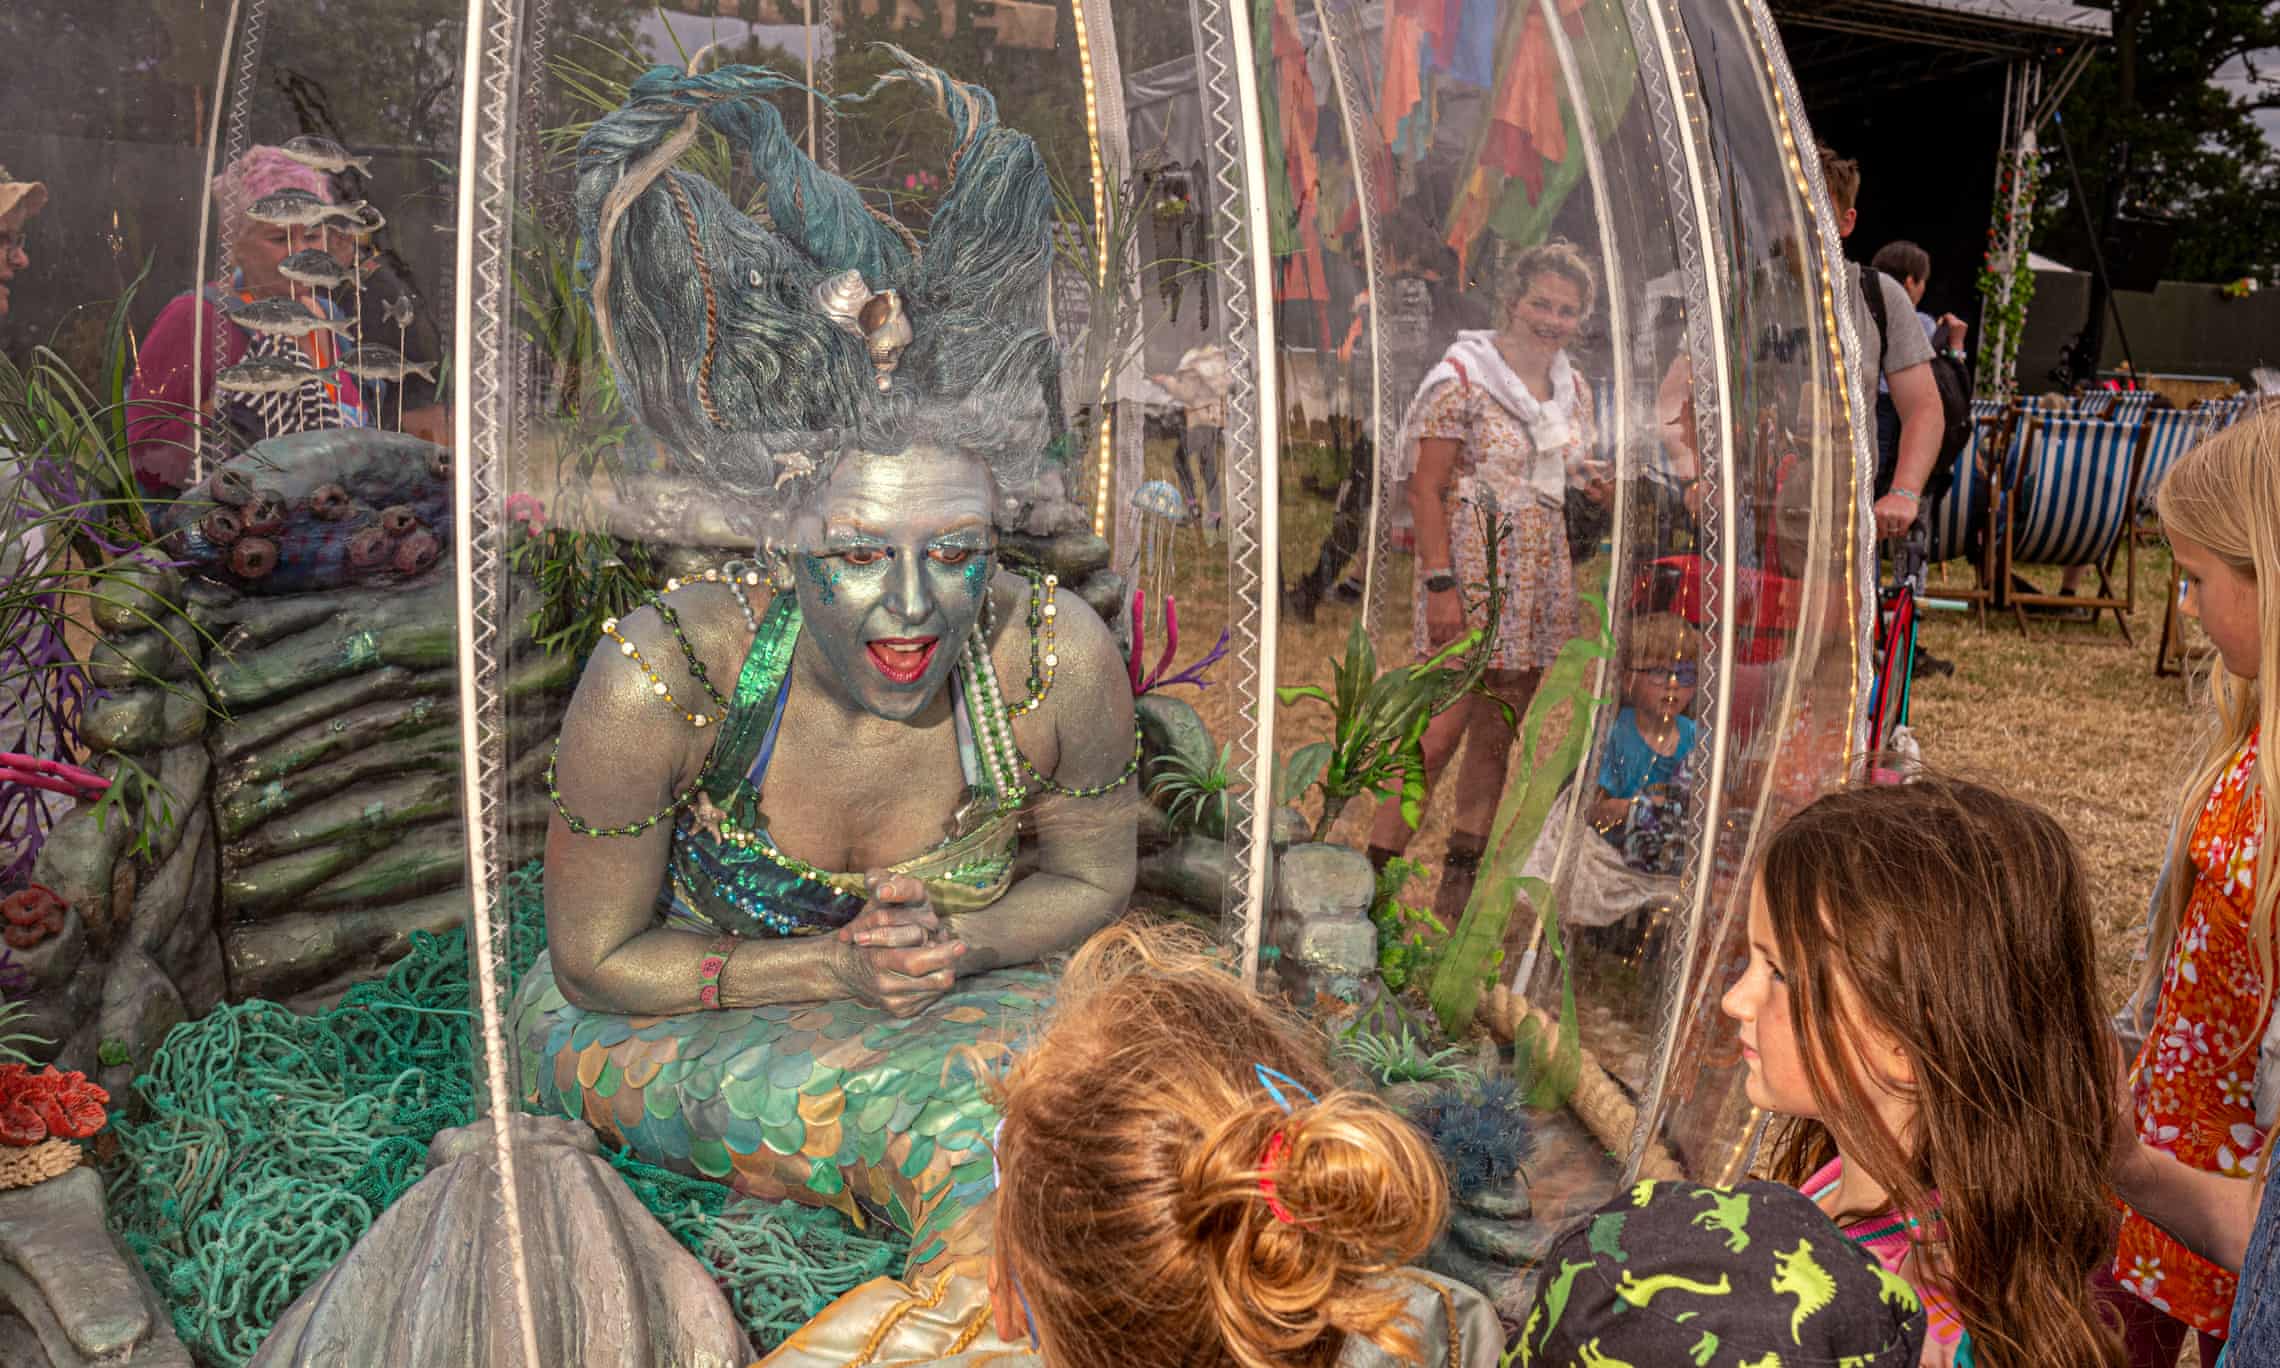 A woman dressed as a mermaid sits inside a large 'goldfish bowl' and talks to the children outside, watching her